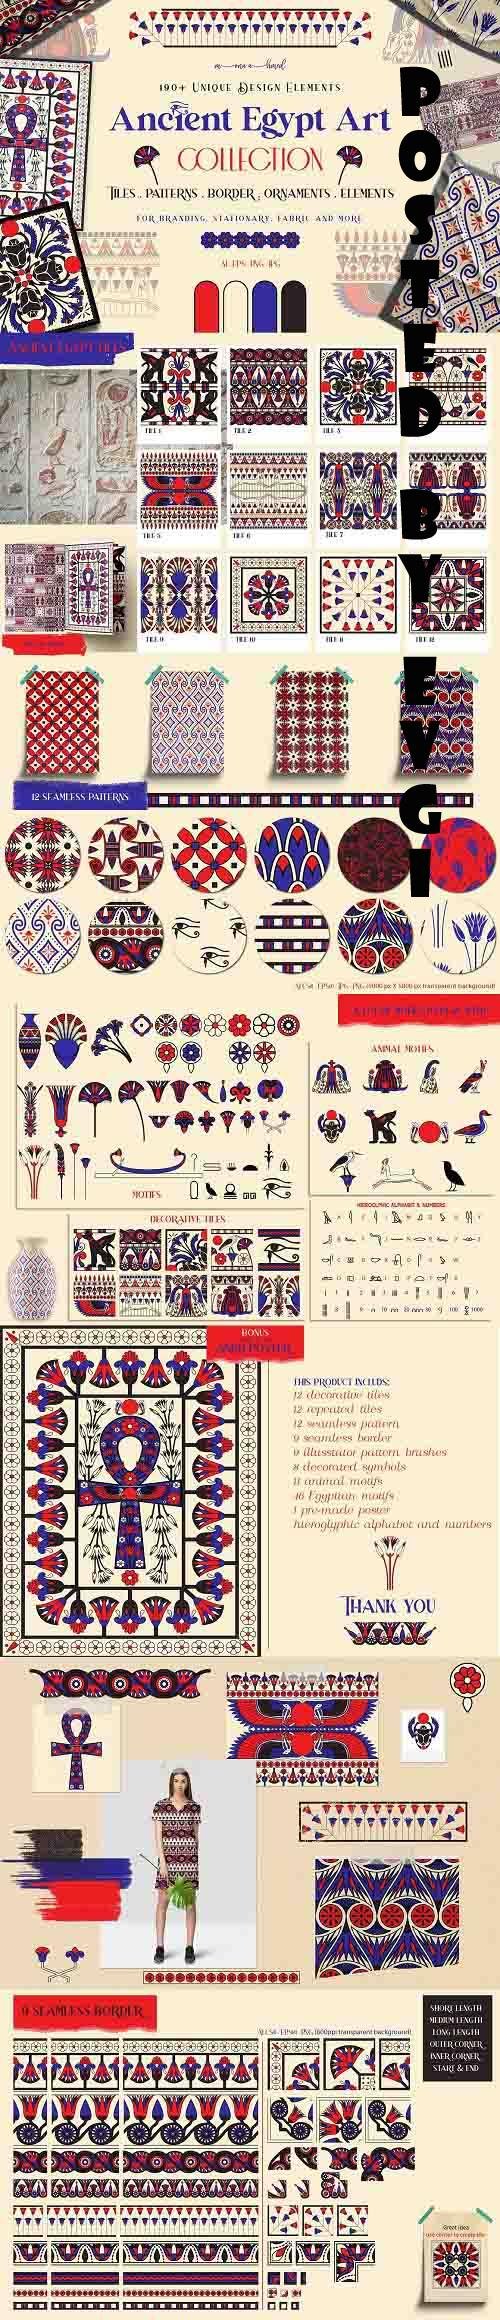 Ancient Egypt Art collection - 6225319